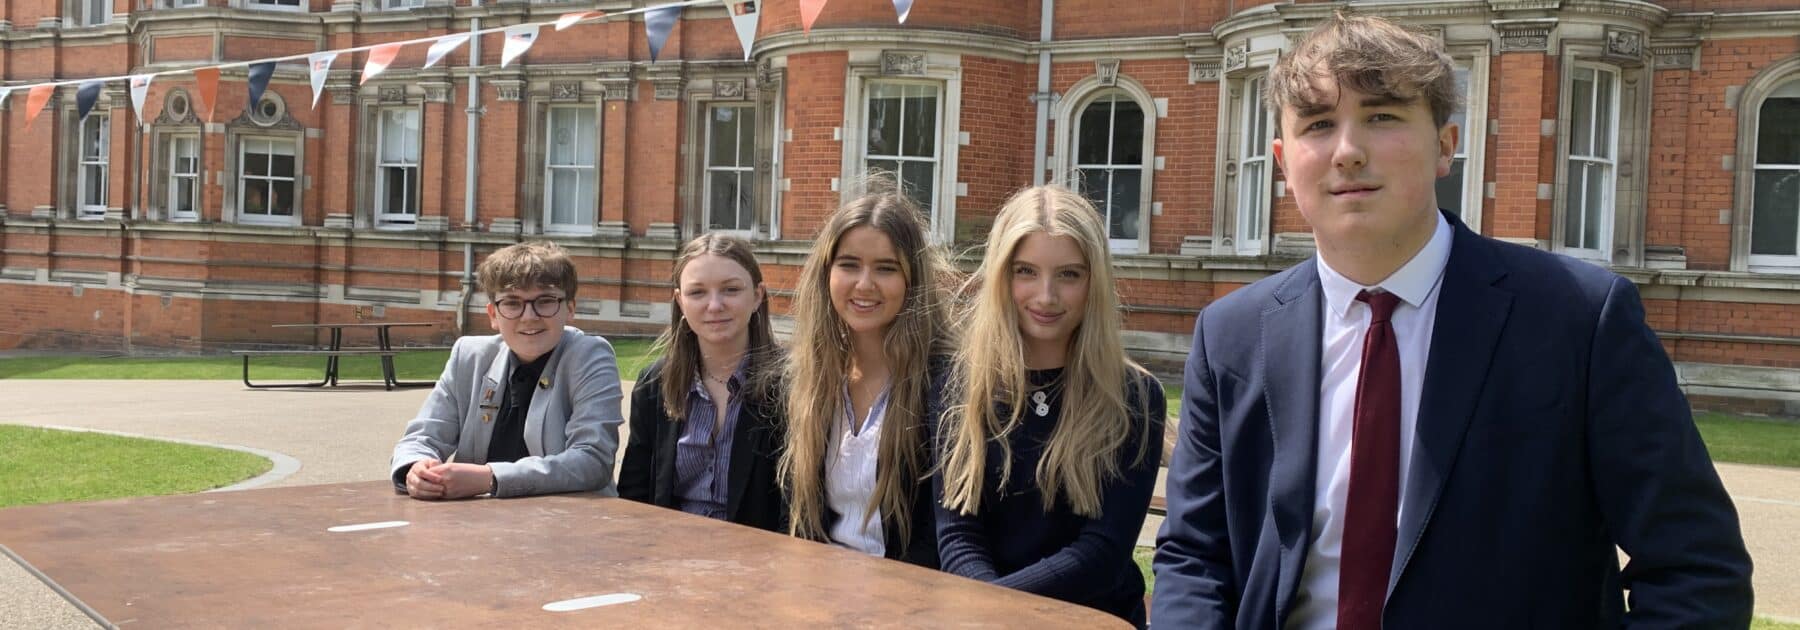 Caterham Wins Gold at Royal Holloway National Psychology Competition